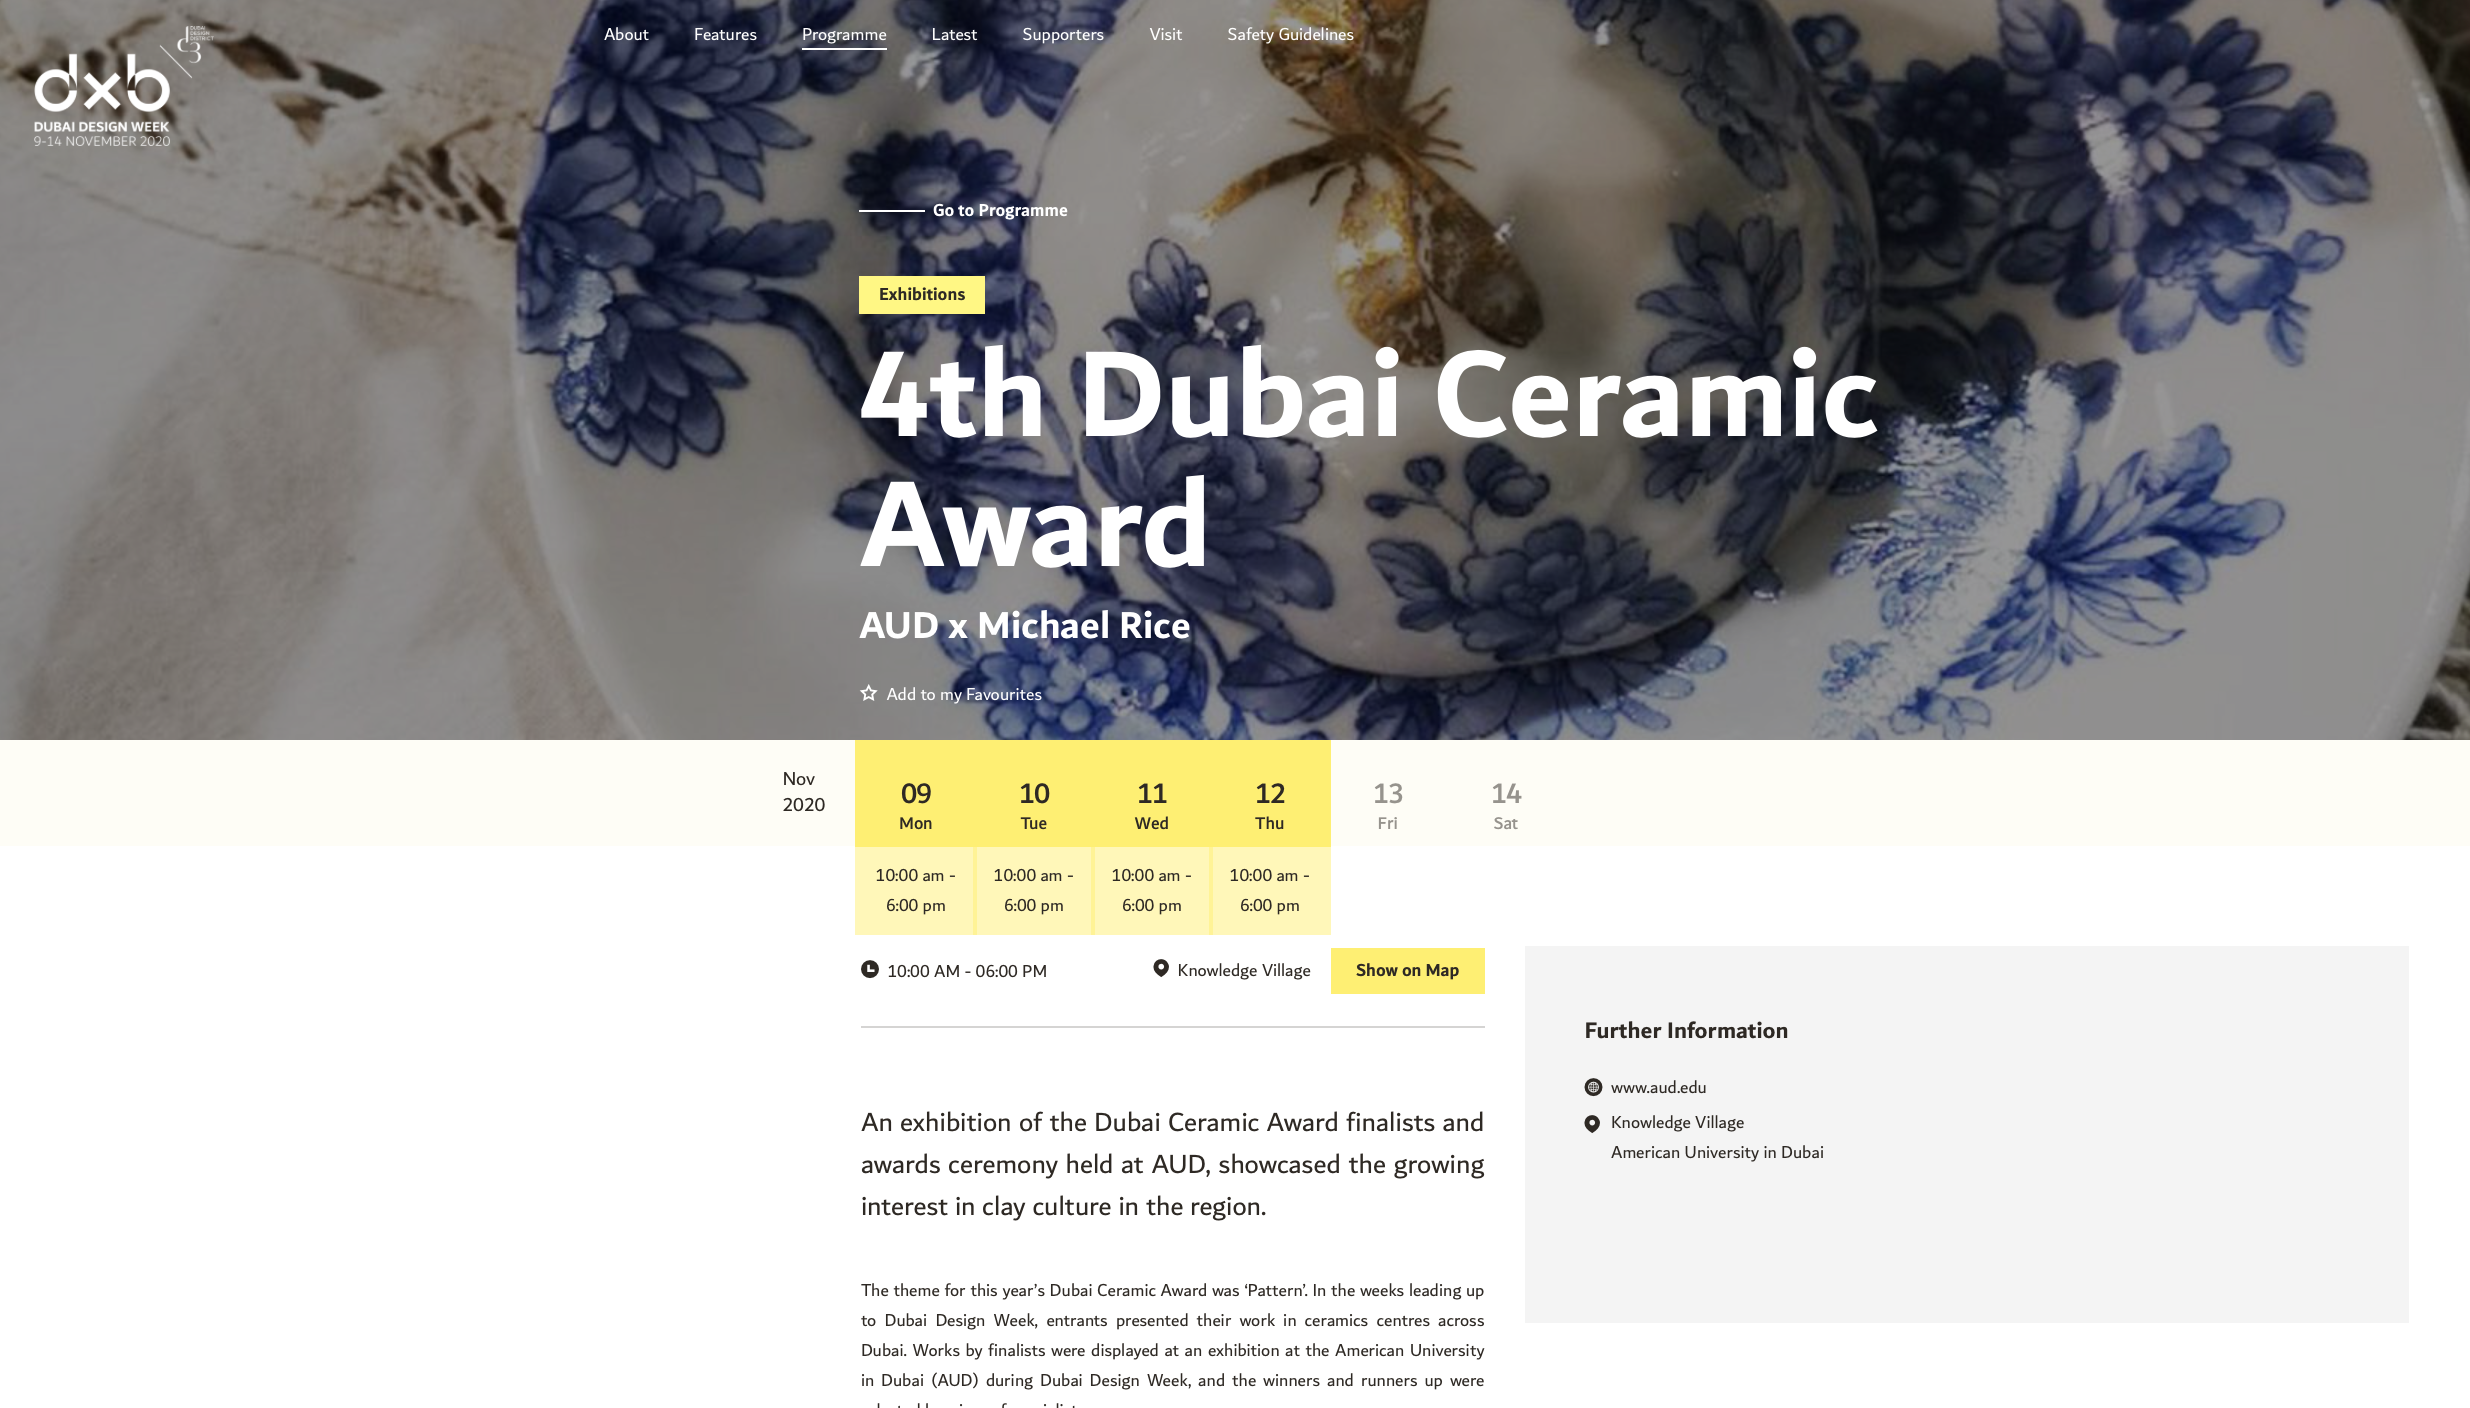  The 4th Dubai Ceramic Award. An exhibition of the Dubai Ceramic Award finalists and awards ceremony held at AUD, showcasing the growing interest in clay culture in the region. 